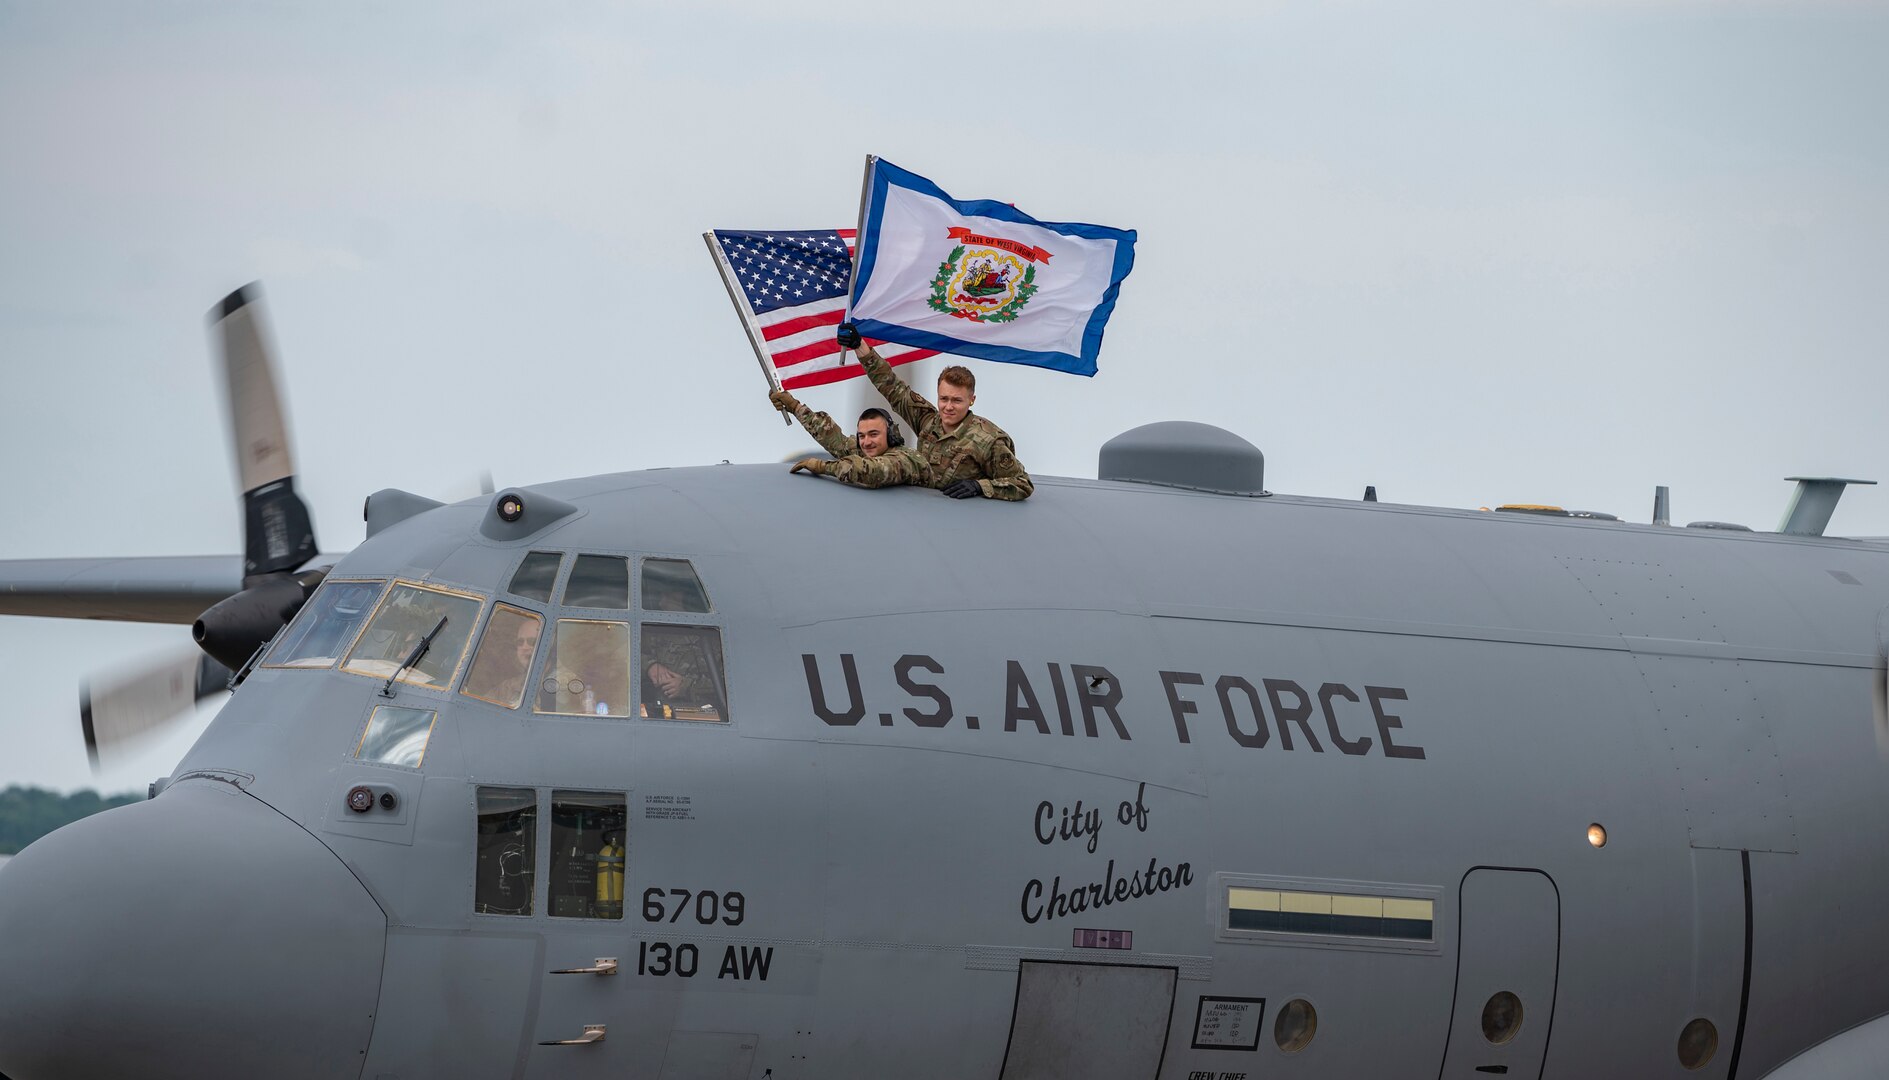 West Virginia National Guard Airmen wave the U.S. and West Virginia flags as they taxi onto the apron after returning from deployment on July 16, 2020, at McLaughlin Air National Guard Base, Charleston, W.Va. Approximately 50 Airmen returned over two days from Kuwait, where they provided support for C-130H operations in the Middle East area of responsibility.